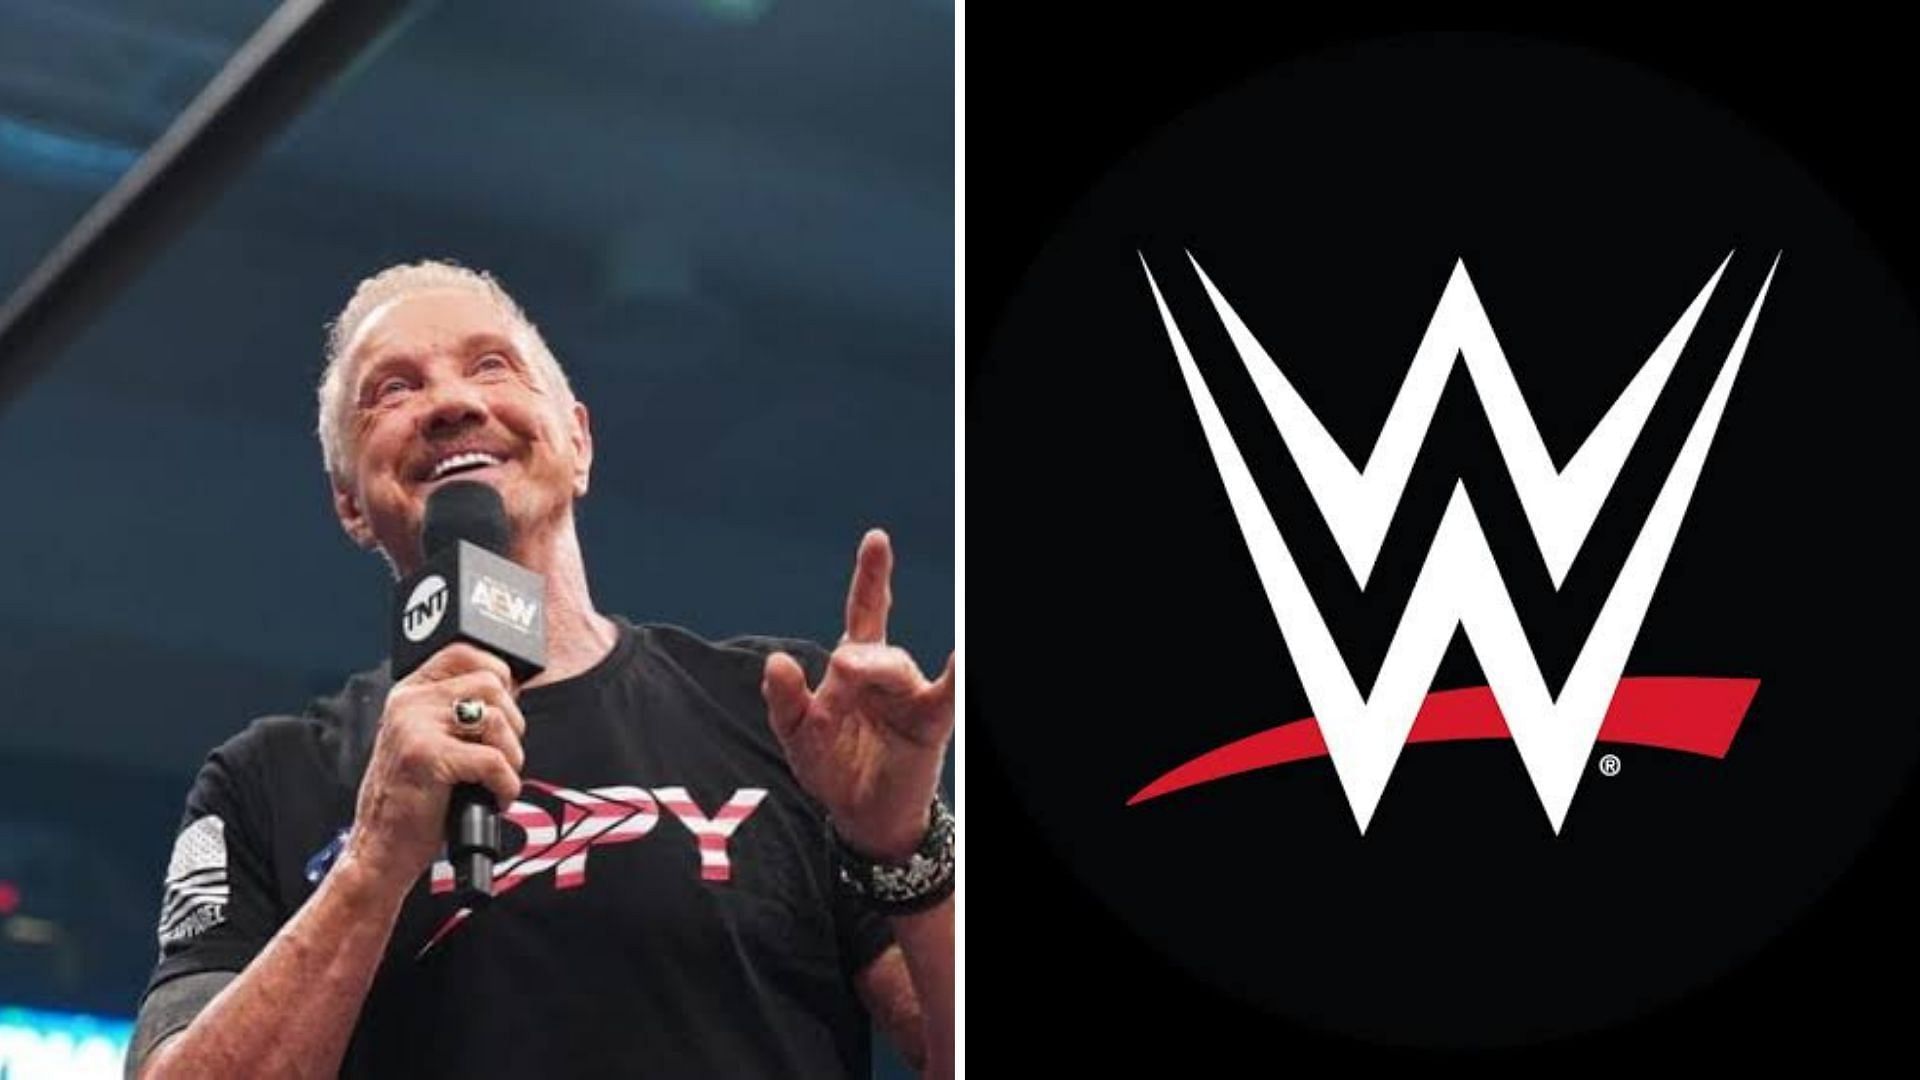 DDP has been in the wrestling business for over 30 years.